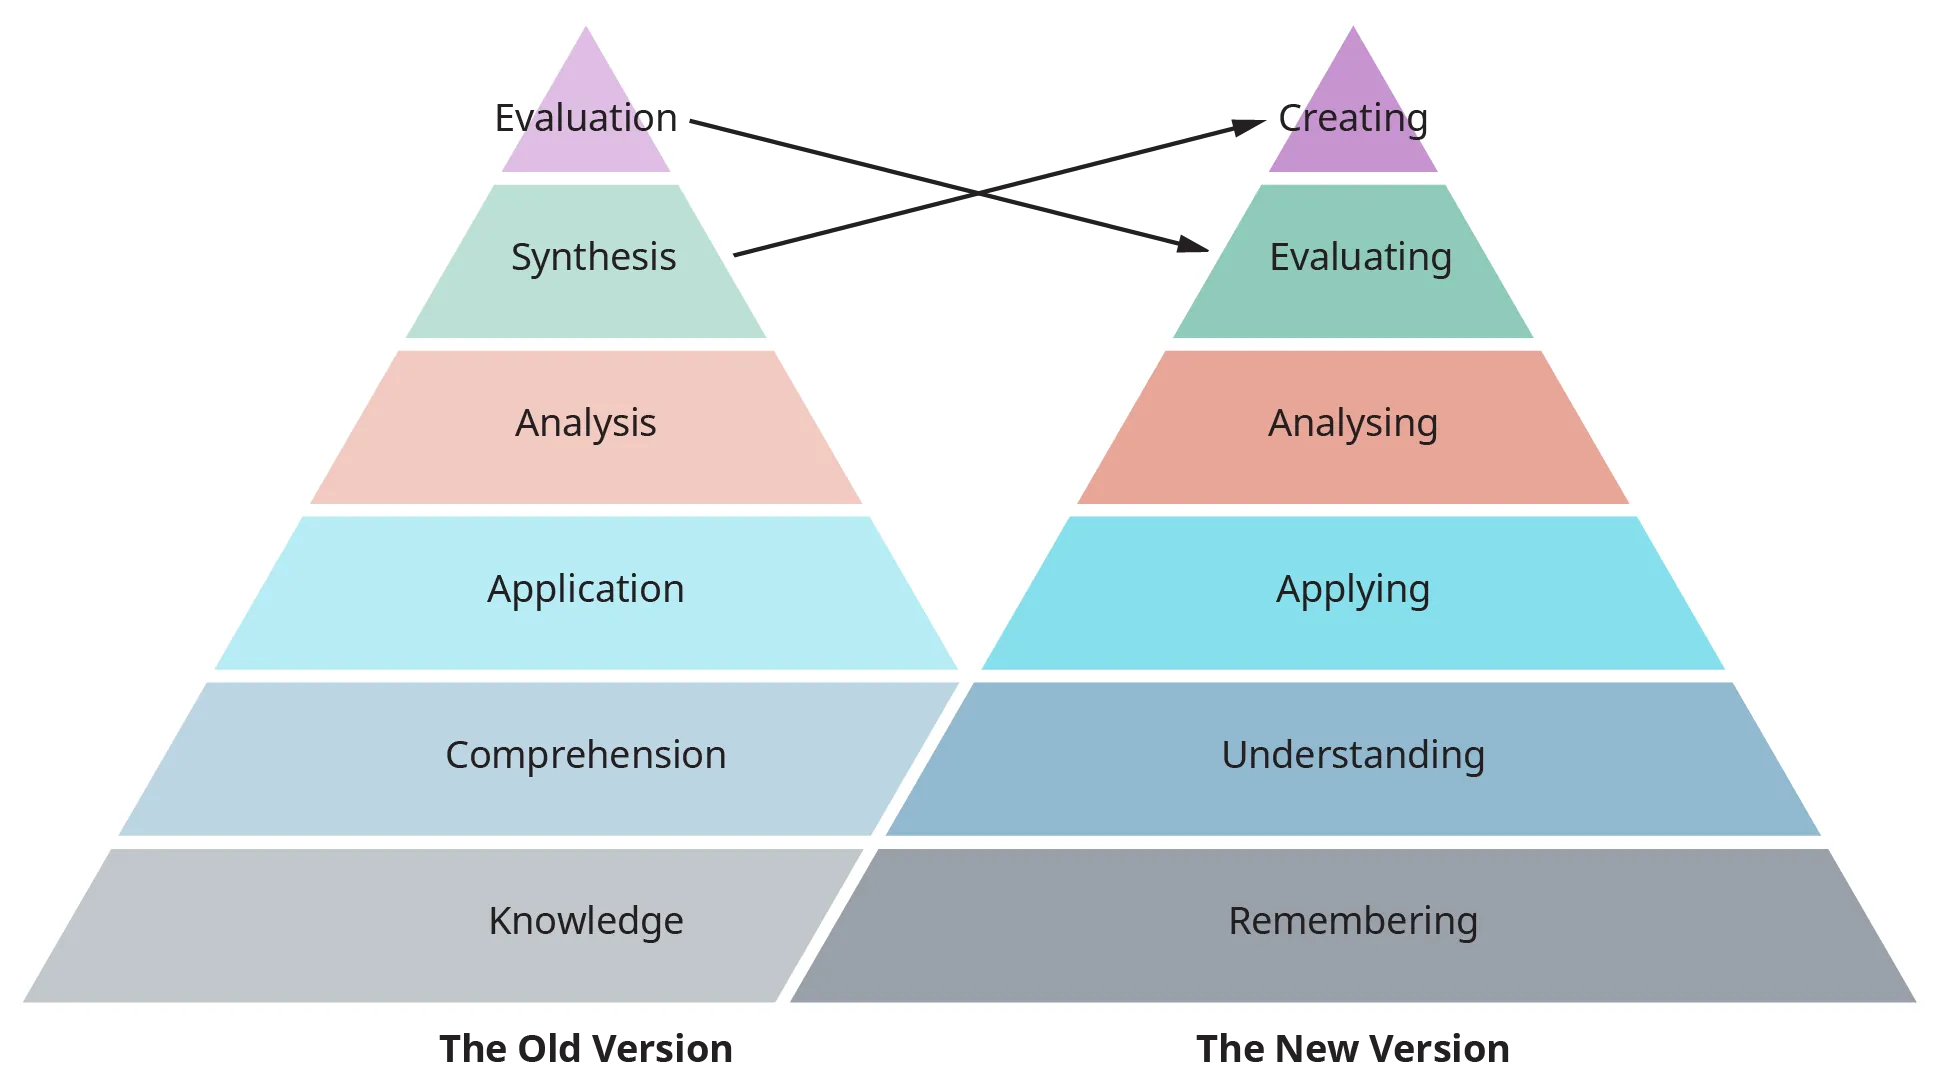 A diagram illustrates the revised version of Bloom’s Taxonomy by showing a comparison between “The Old Version” versus “The New Version.”